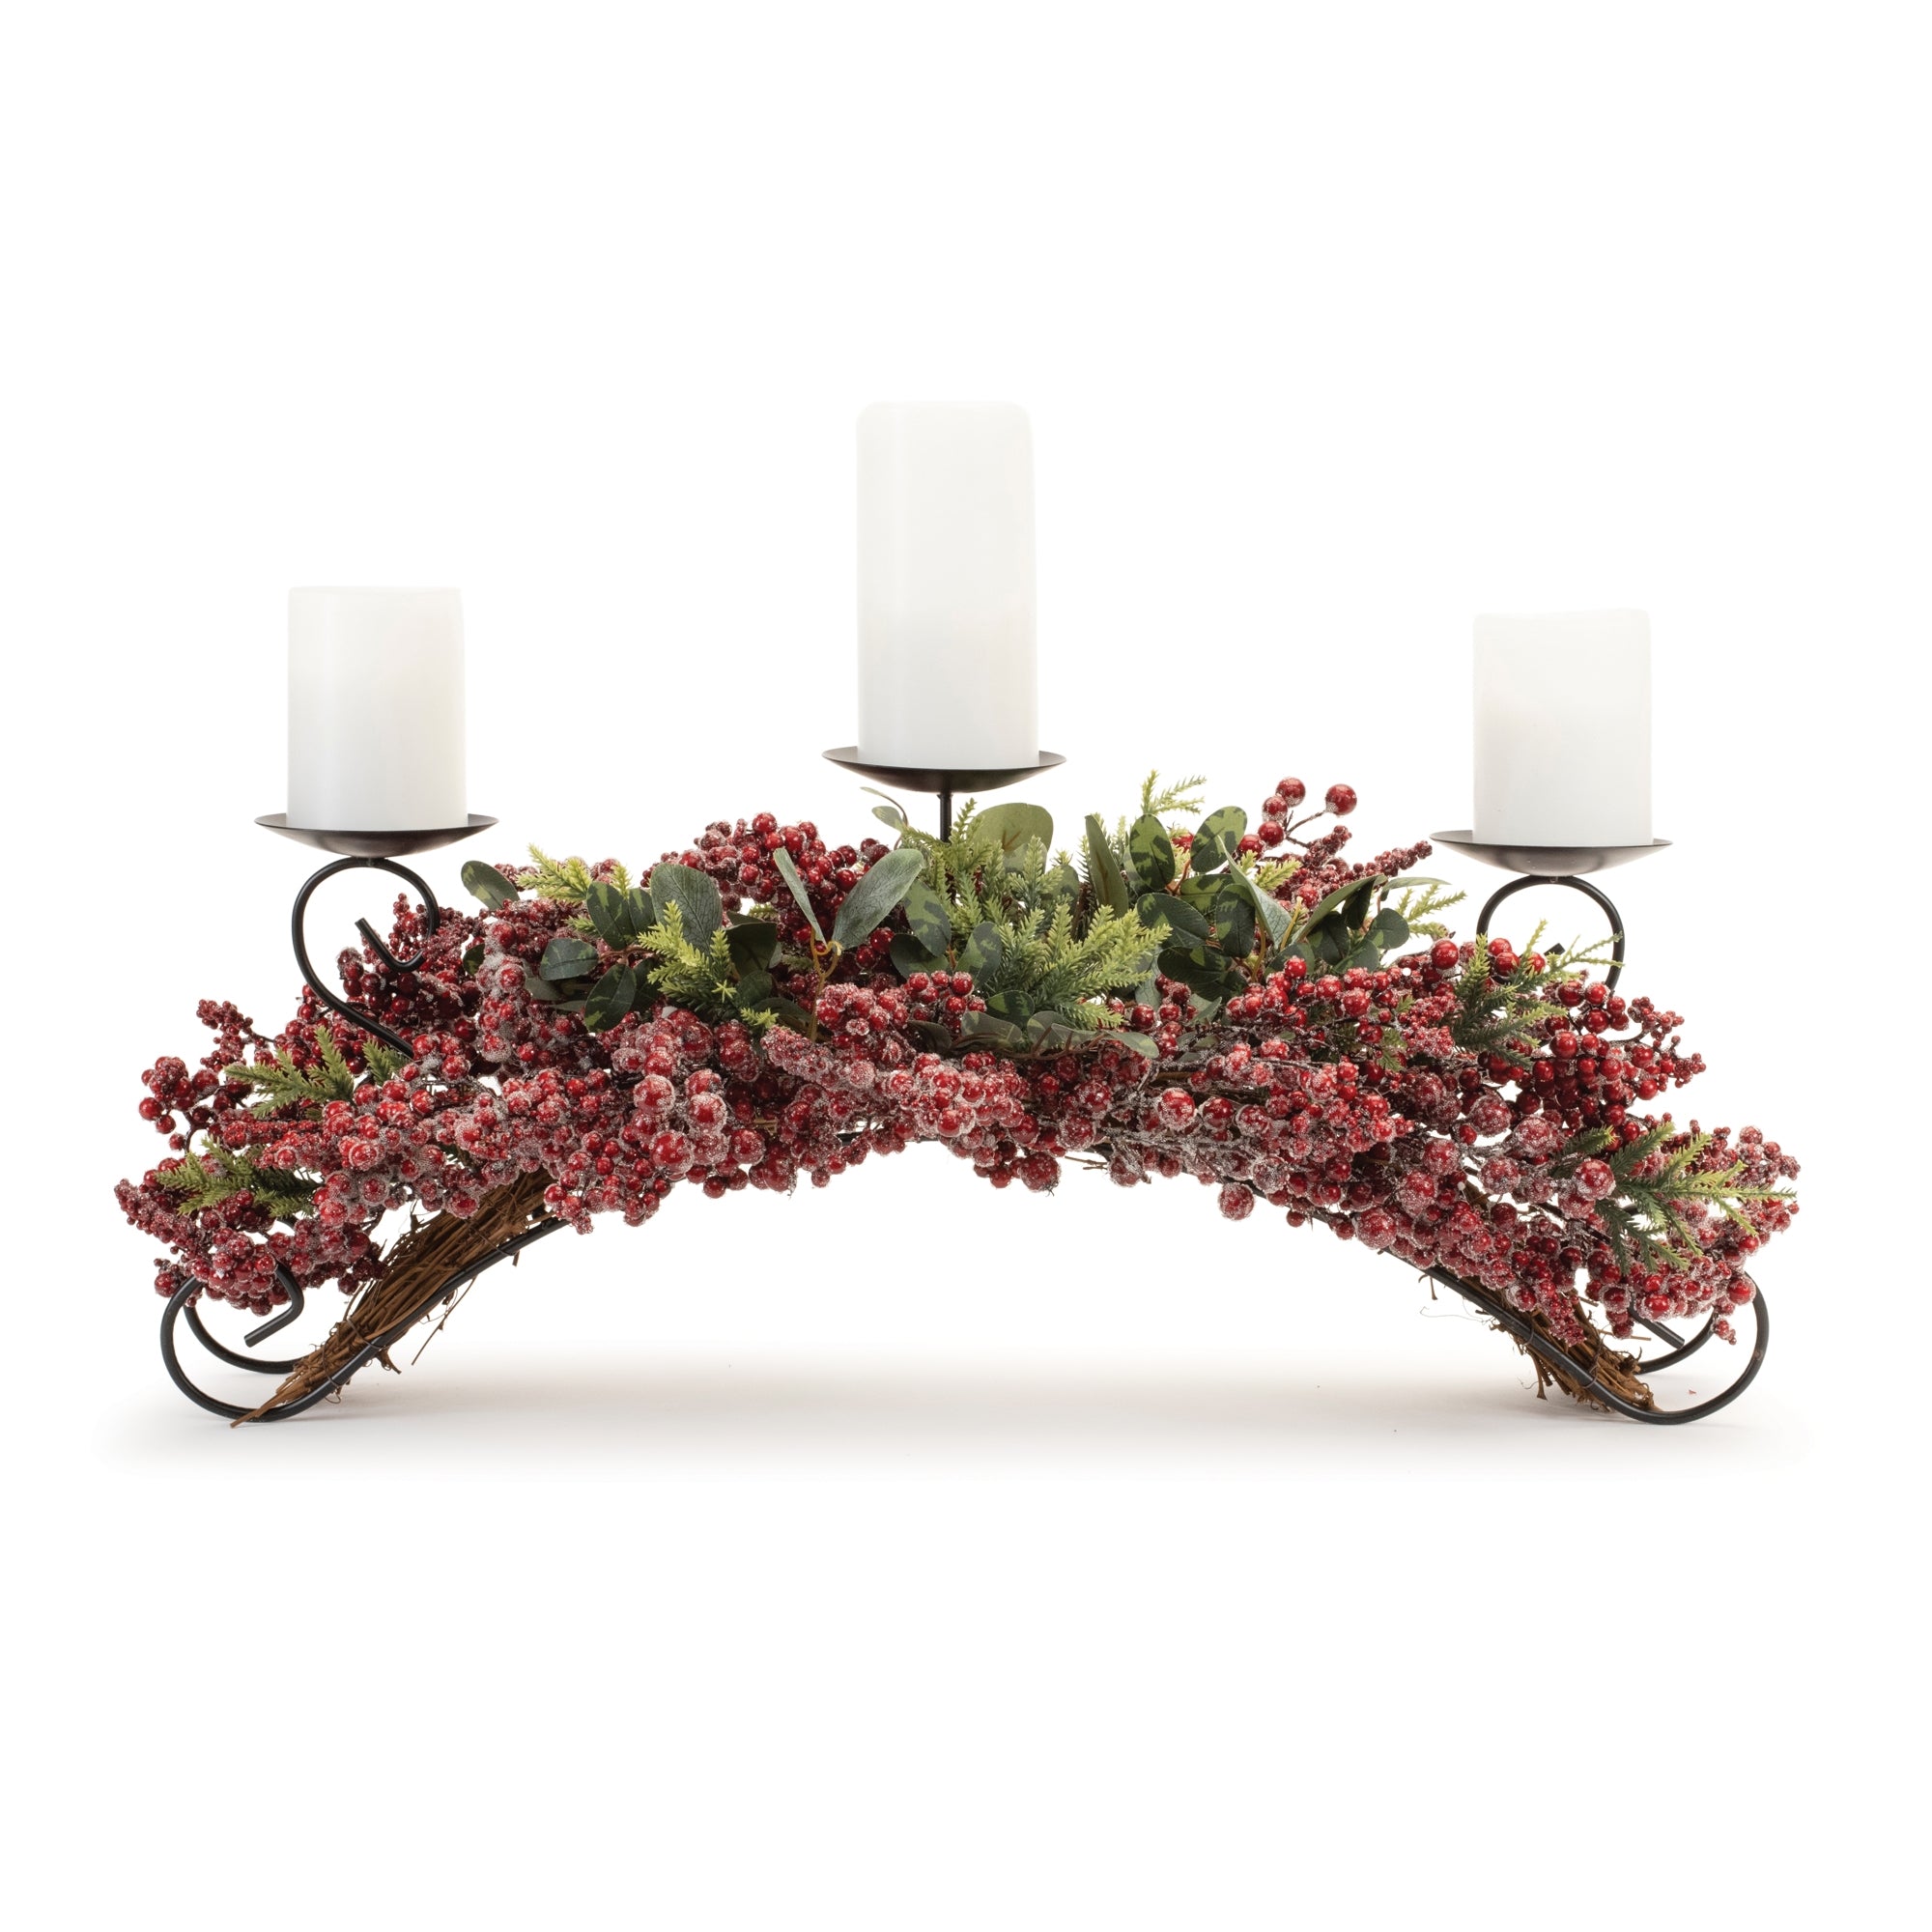 Pine and Berry Centerpiece Candle Holder 31"L